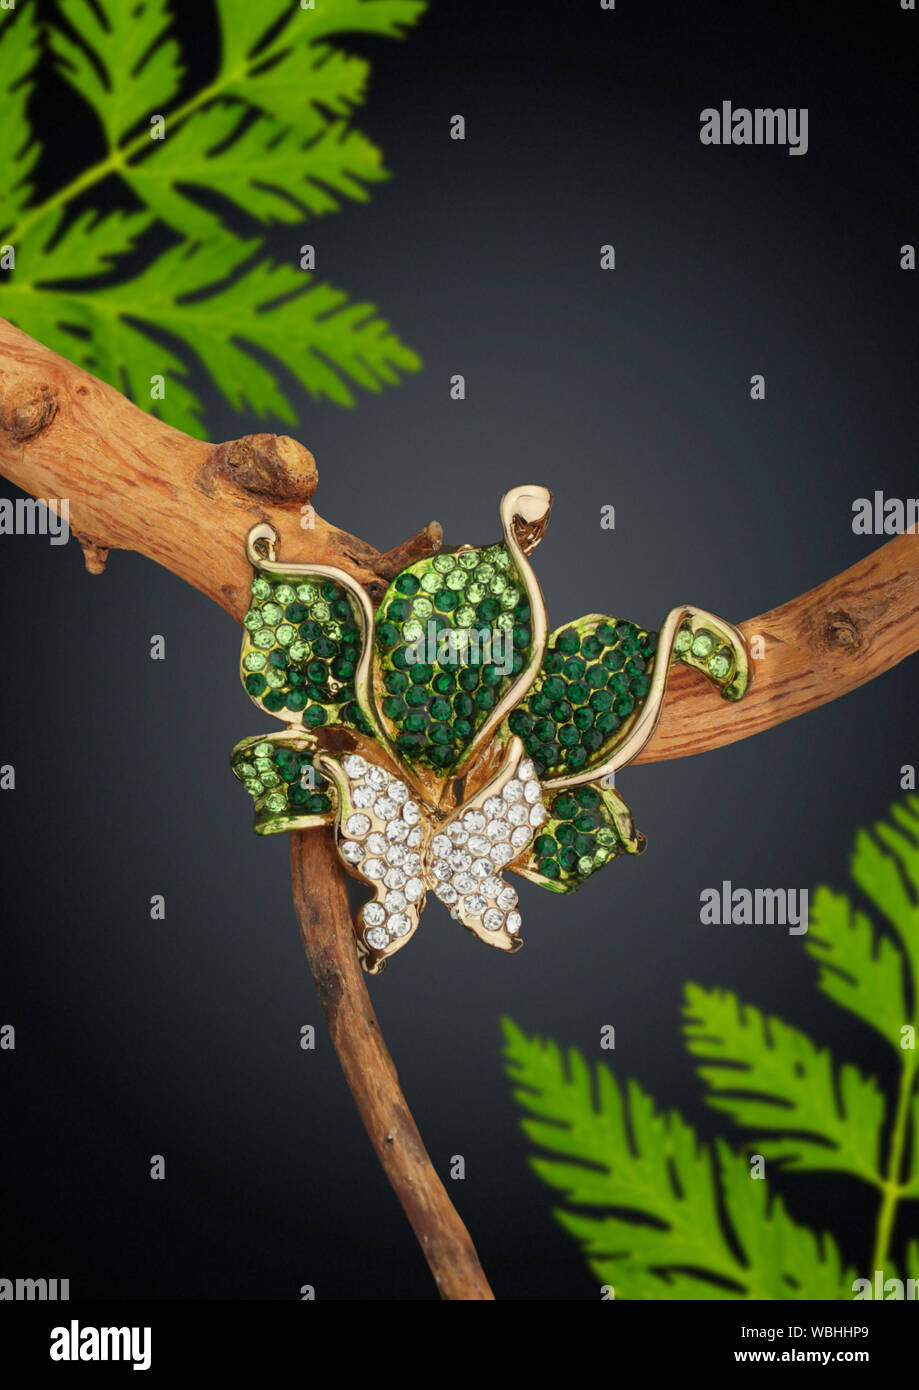 Golden Jewelry ring with gems on branch with leafs Stock Photo